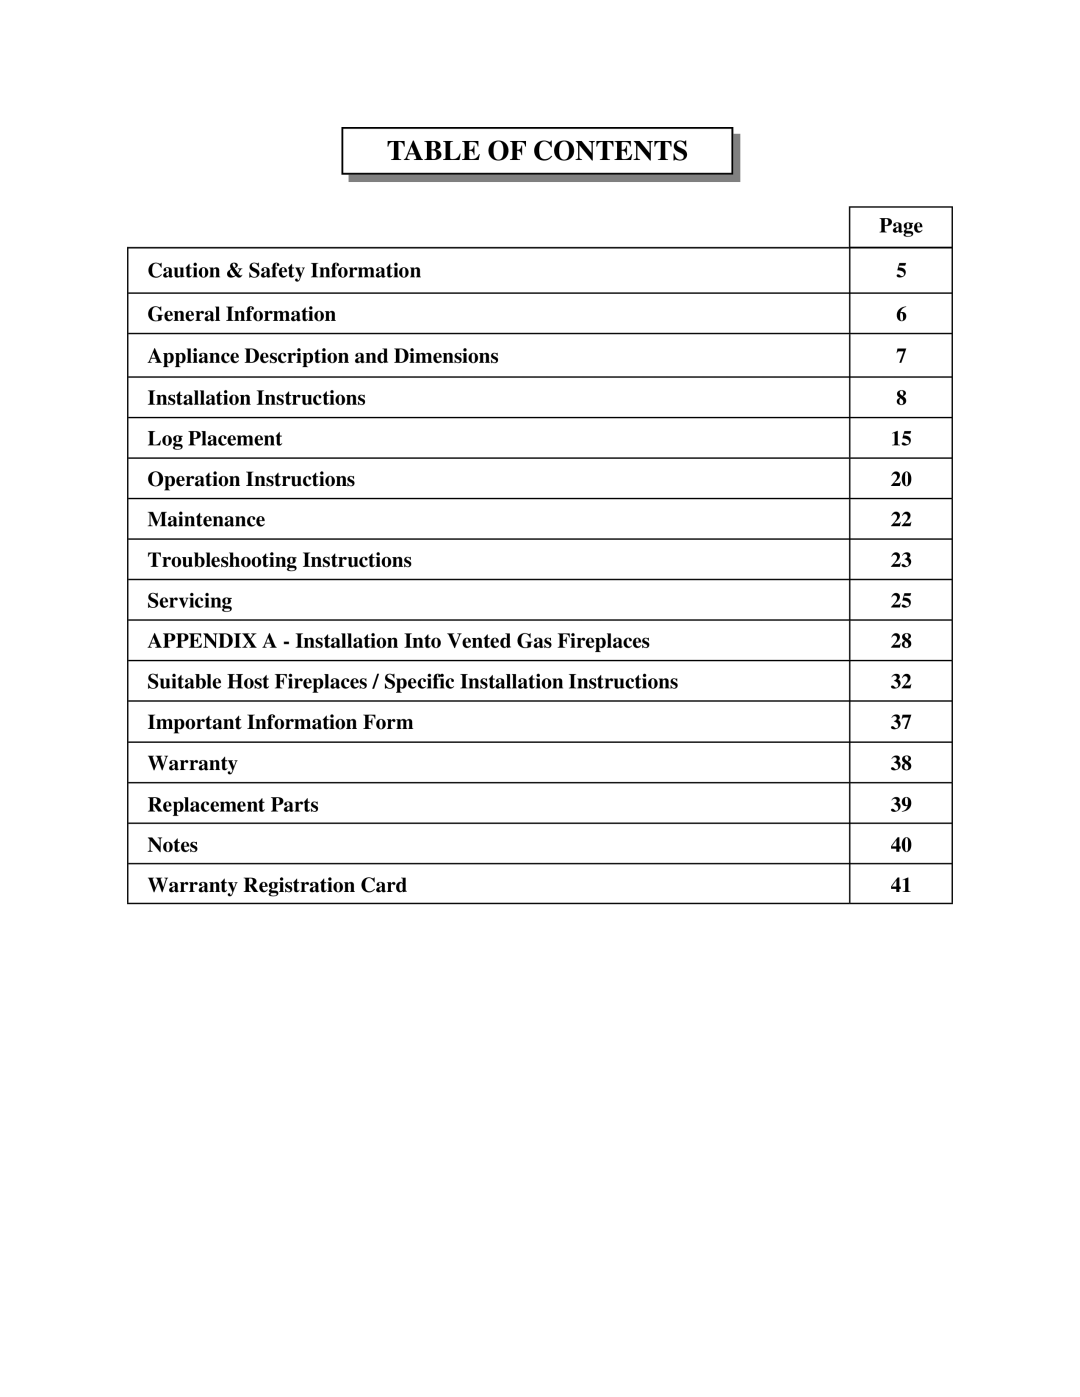 Delkin Devices EI - 25-1 manual Table Of Contents 